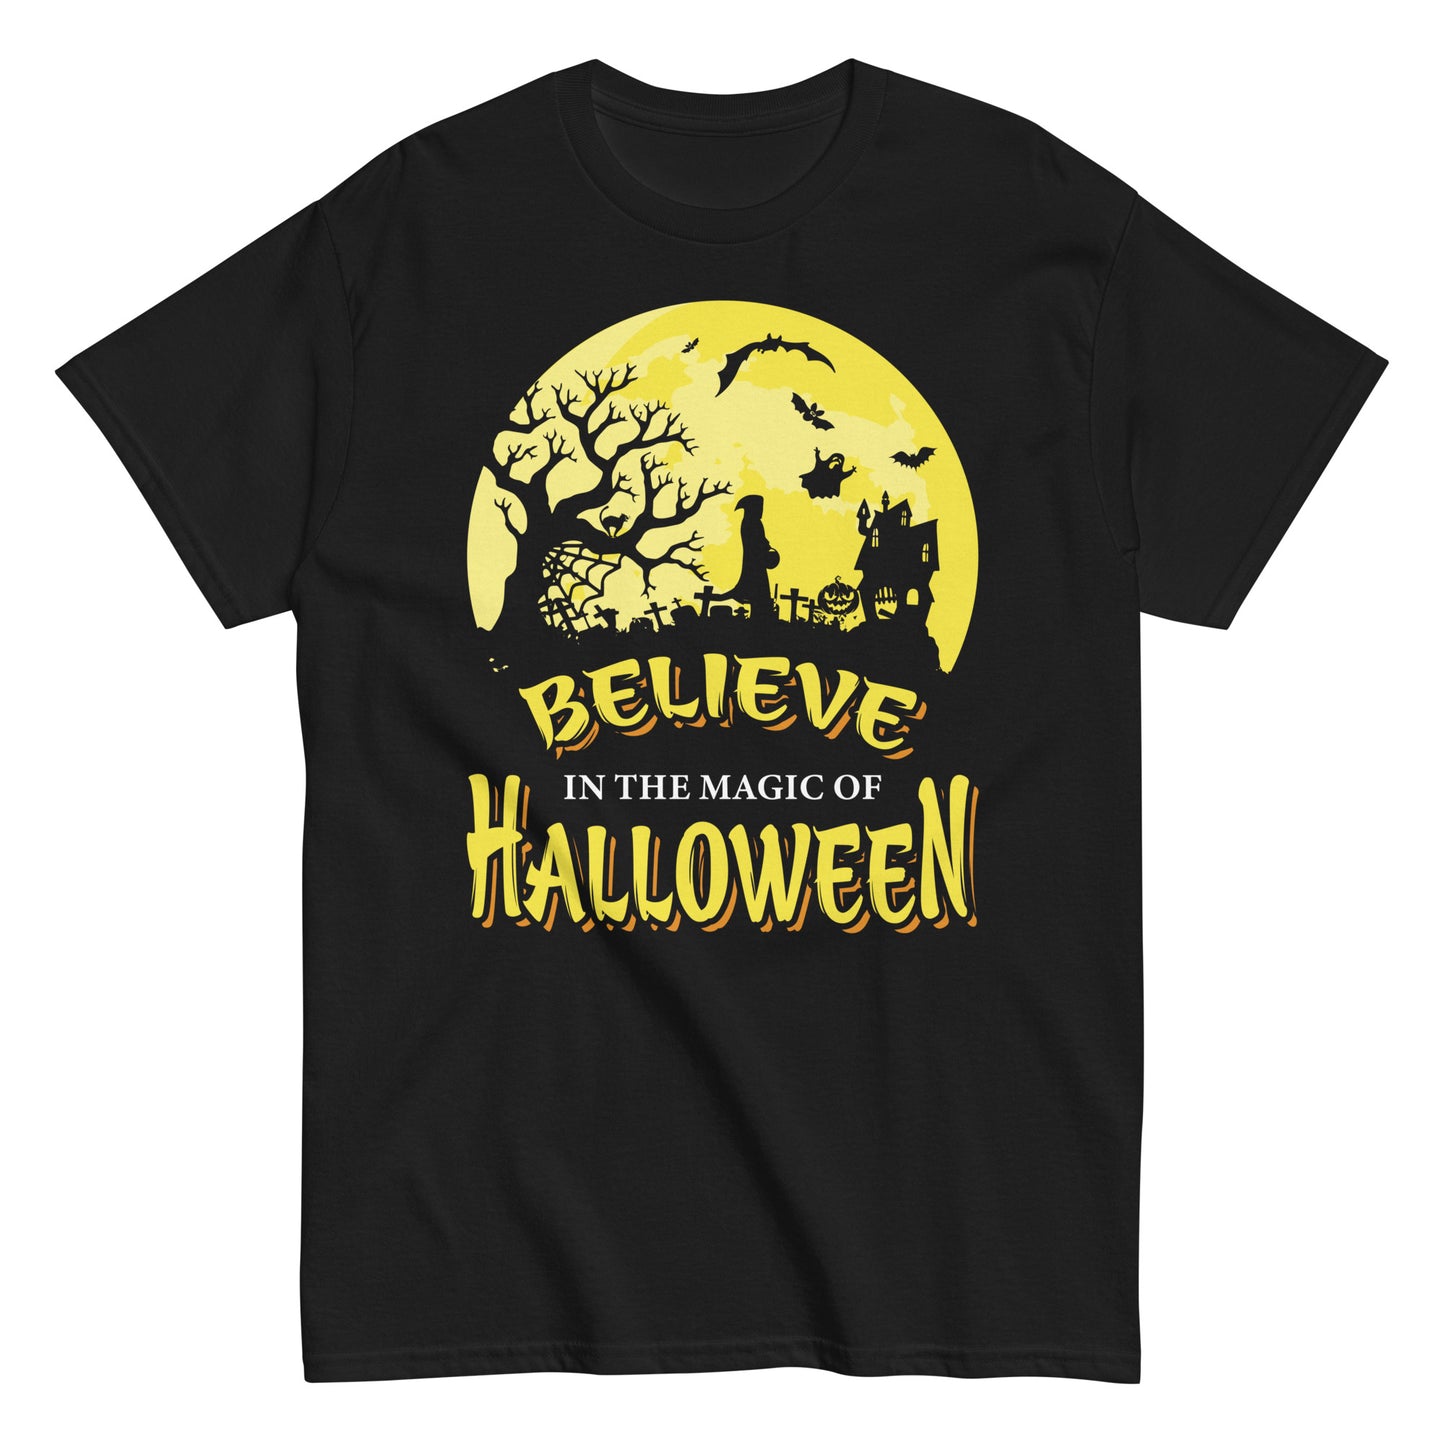 Chic and Enchanting: Believe in the Magic of Halloween Tee